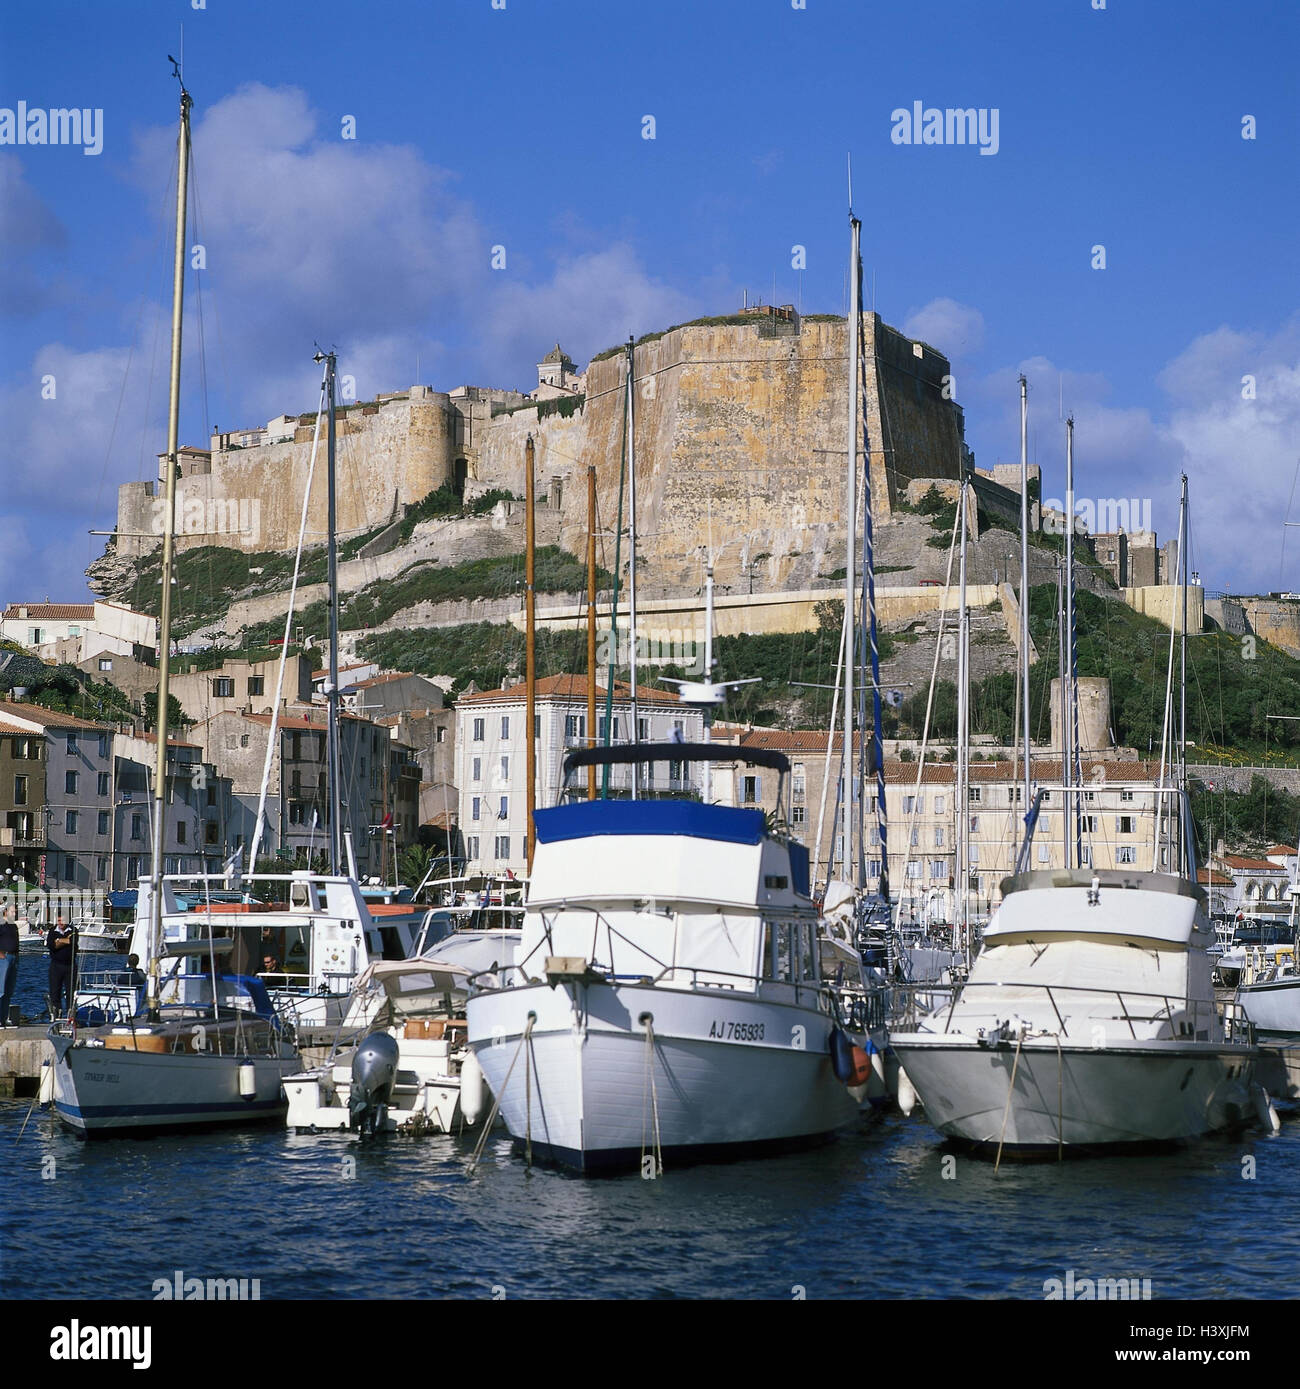 France, island Corsica, Bonifacio, town view, stronghold, harbour, island, Mediterranean island, the Mediterranean Sea, sea, town, historically, Old Town, fastening defensive wall, boots, motorboats, sailboats, yachts Stock Photo